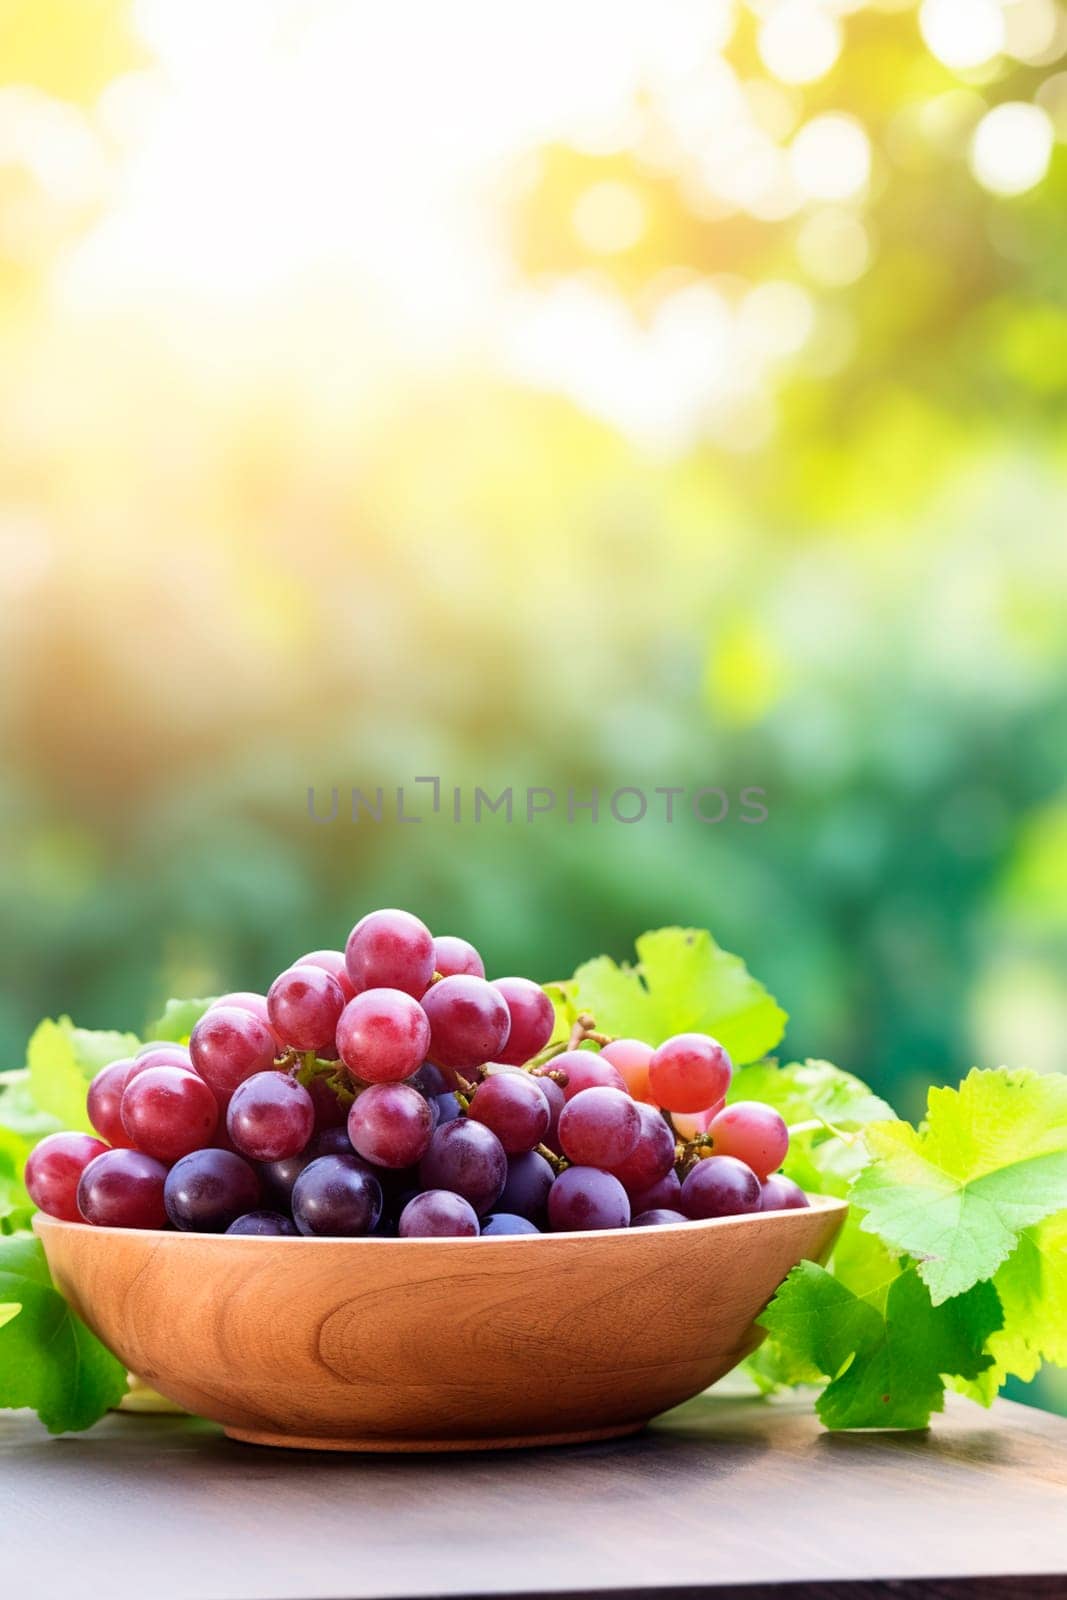 Grapes in a bowl against the backdrop of the garden. Selective focus. Food.